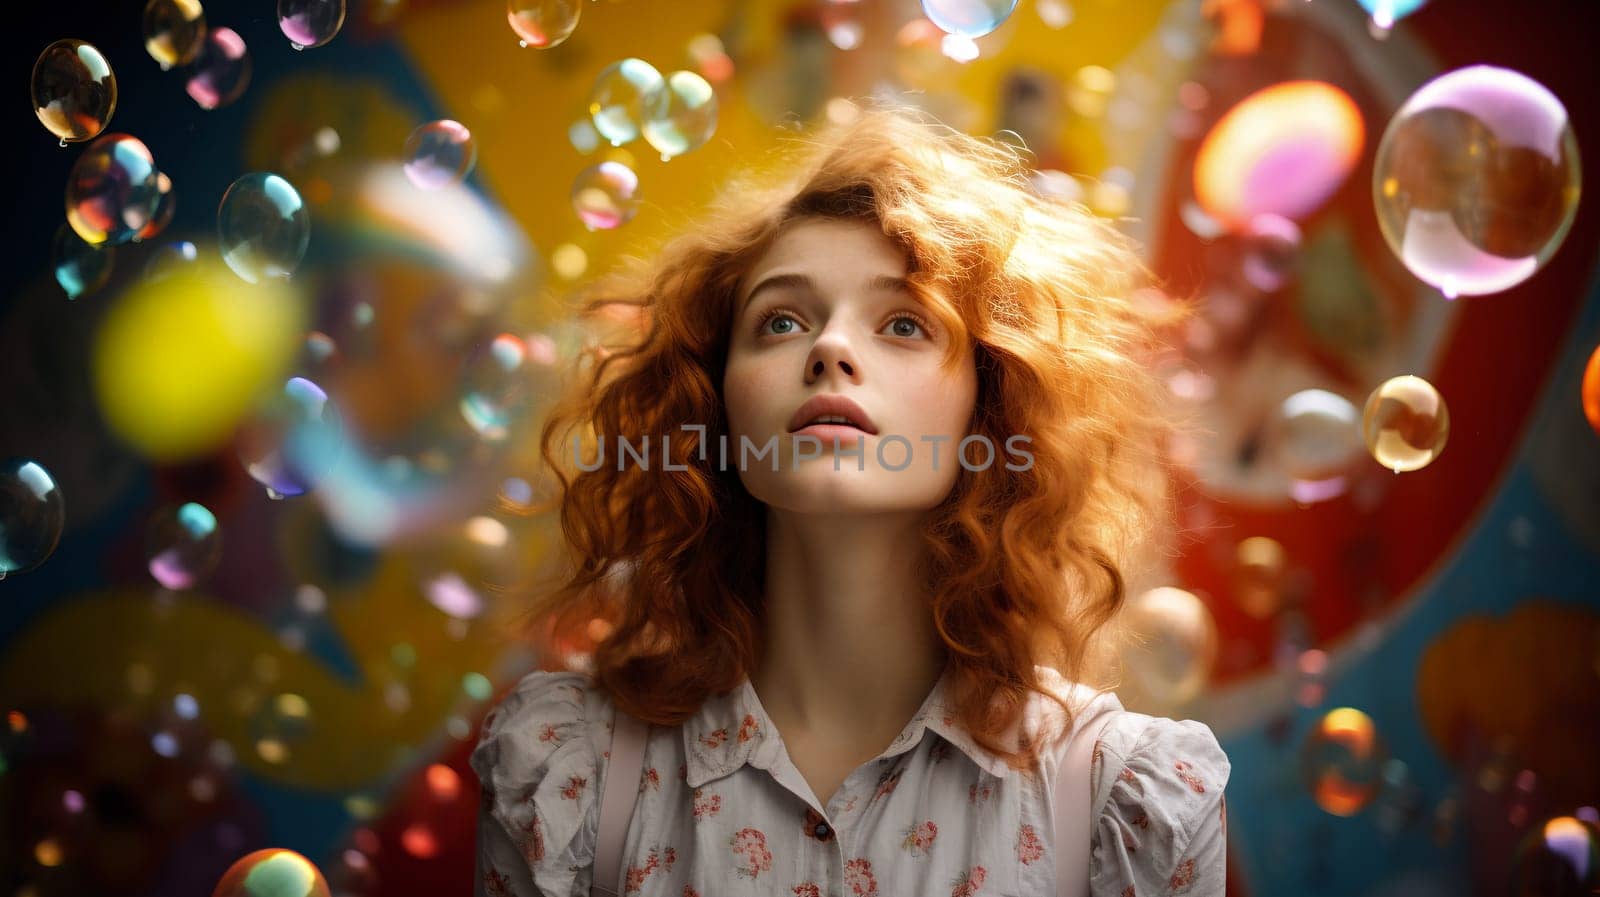 Young woman with curly red hair surrounded by colorful bubbles by chrisroll